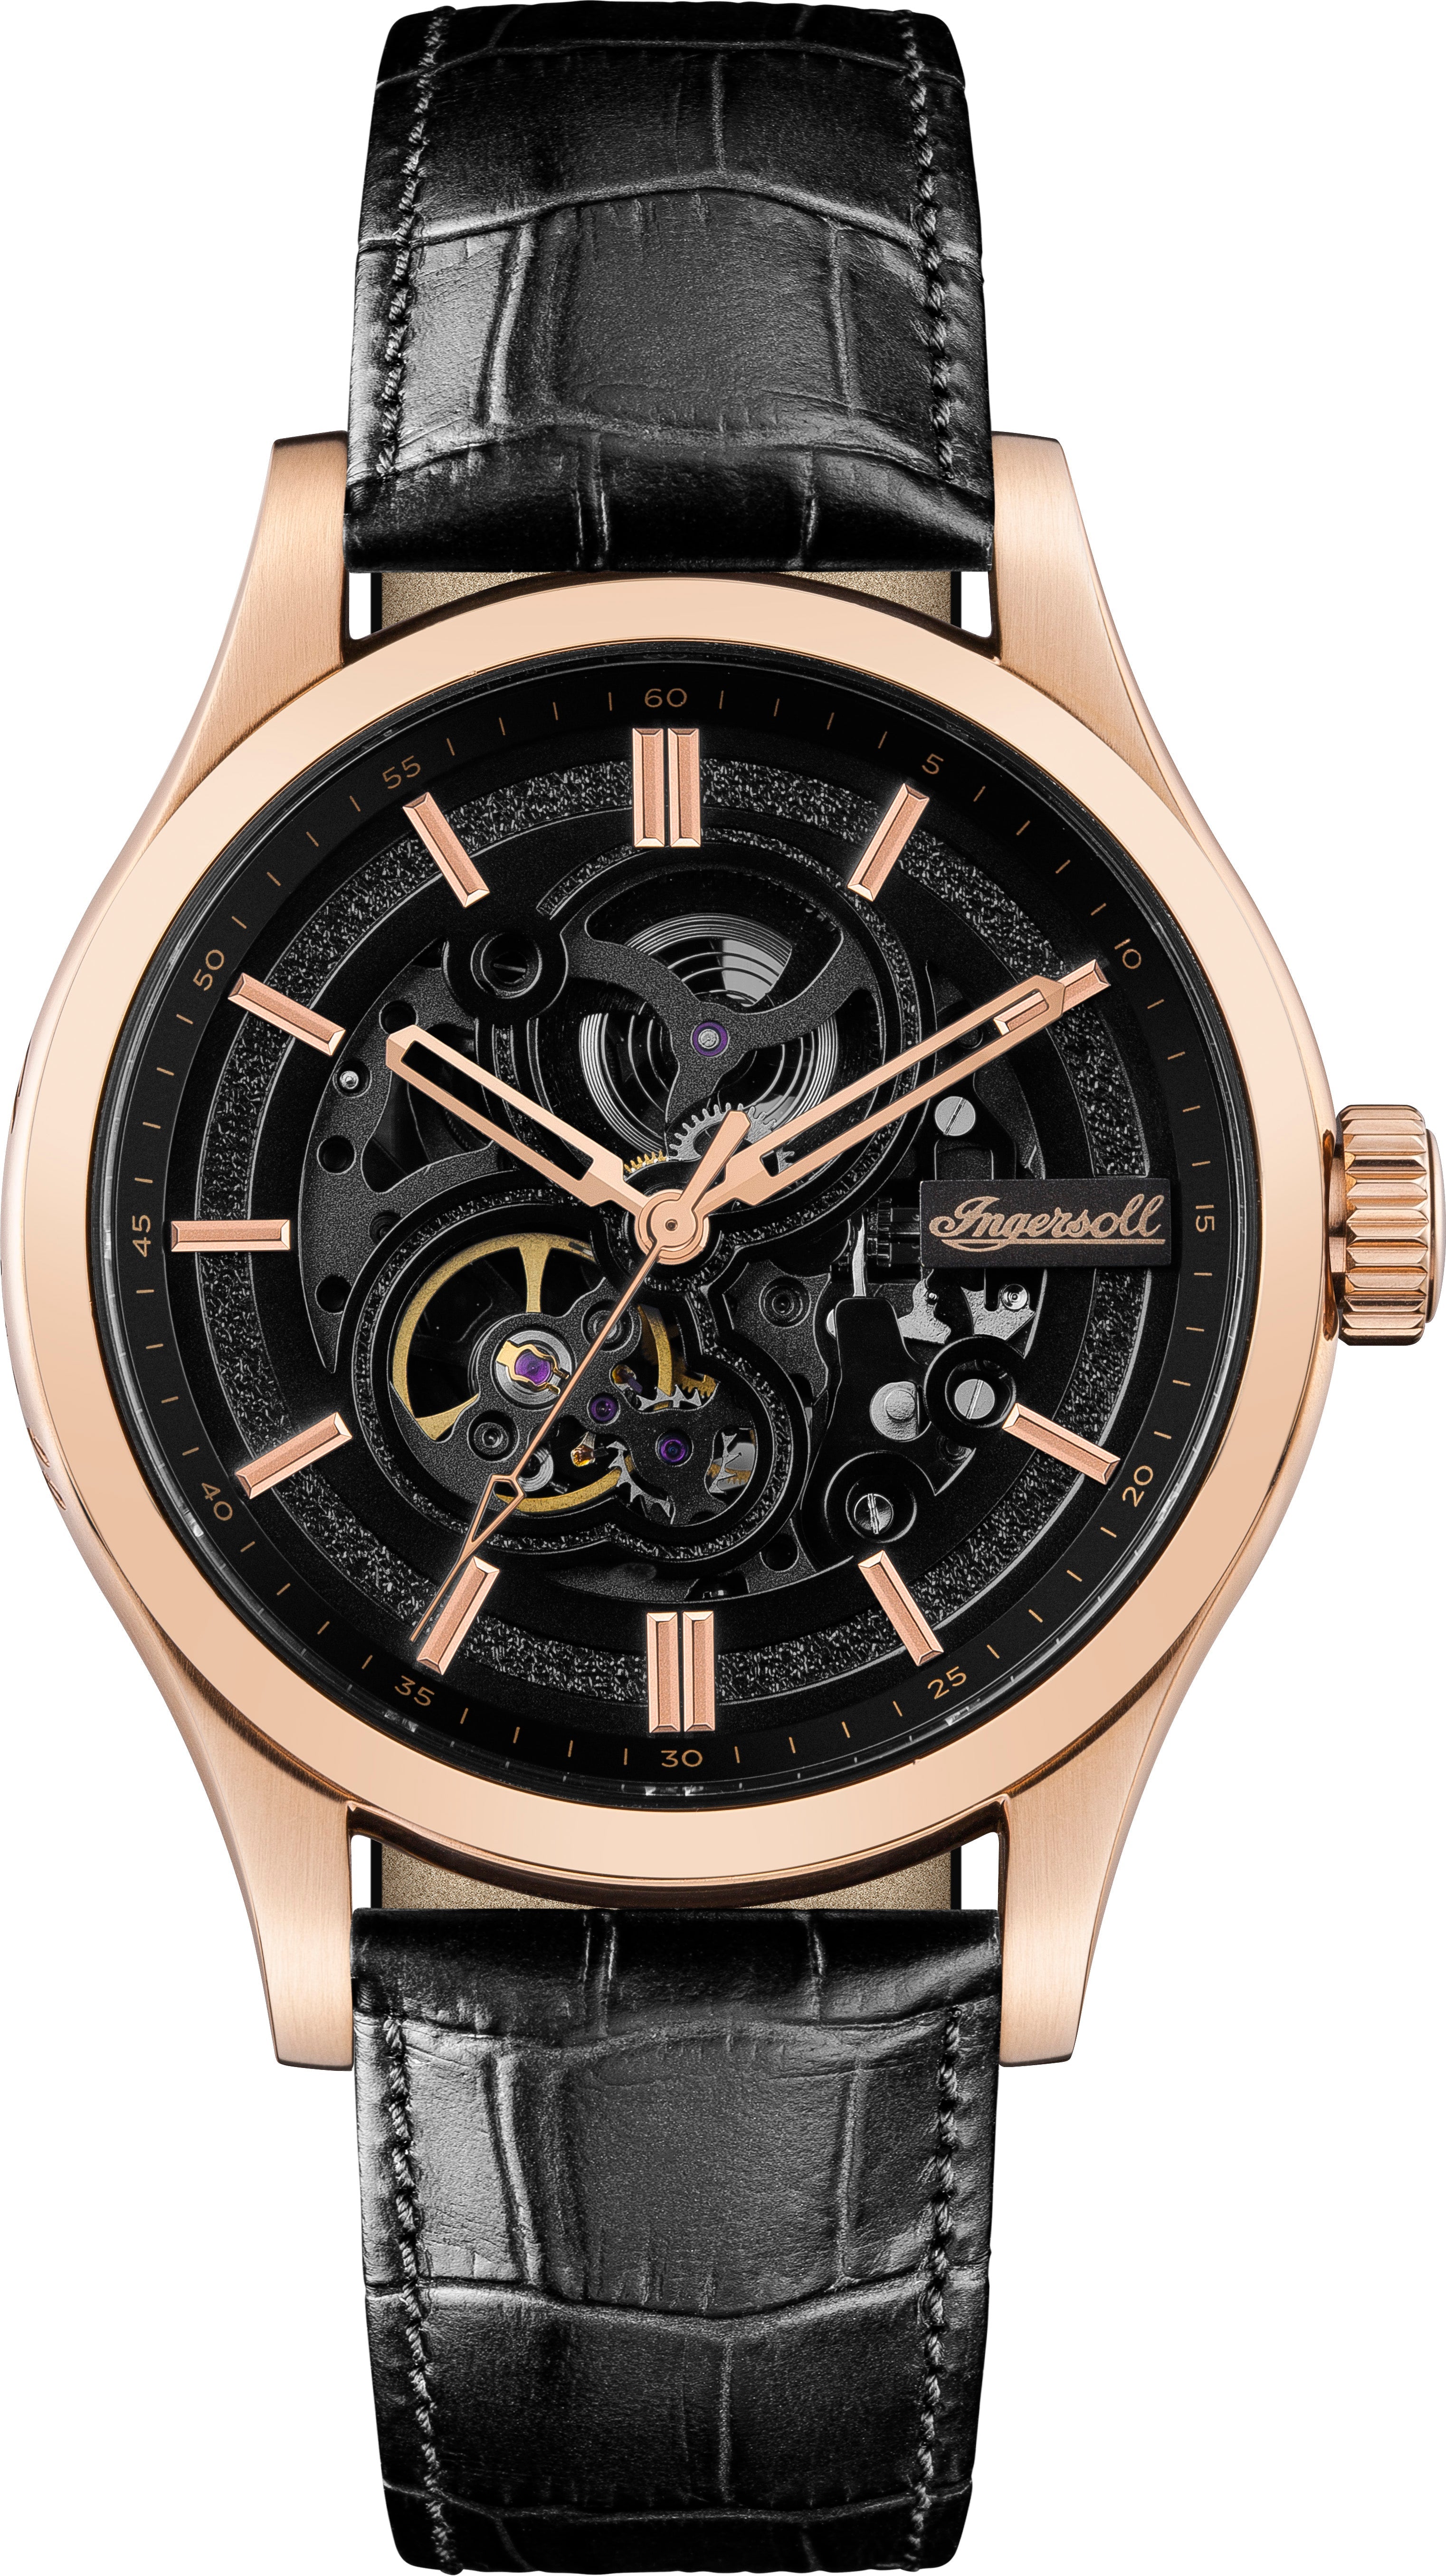 The Armstrong Rose Gold Watch